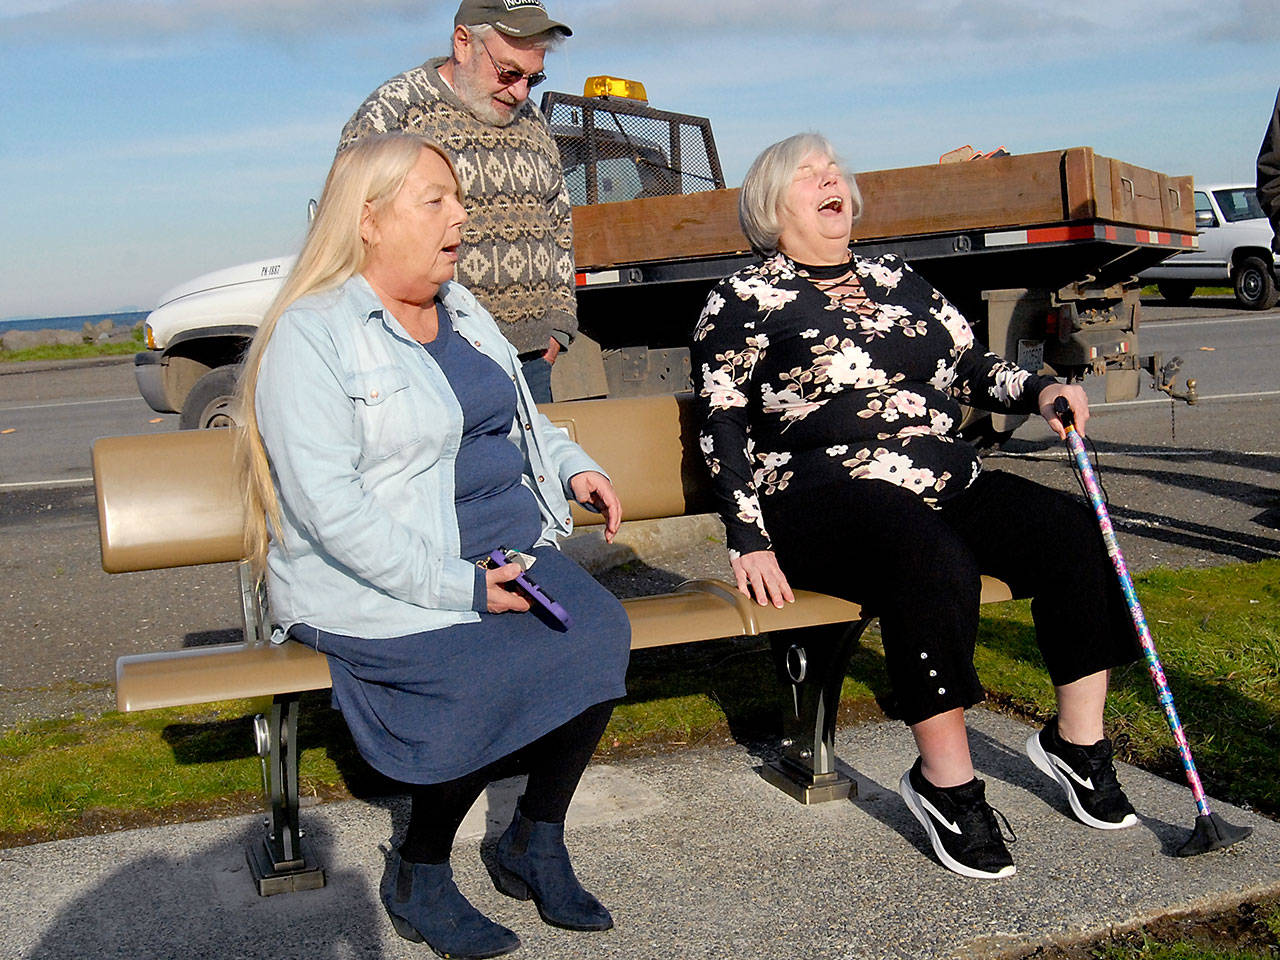 Sisters Karen Borneman of Port Angeles, left, and Sherry Schleufer of Longview, right, were the first to sit on a recycled carbon fiber park bench as brother Dale Gesellchen of Port Angeles looks on after the bench was installed Tuesday near the boat launch on Ediz Hook in Port Angeles. (Keith Thorpe/Peninsula Daily News)